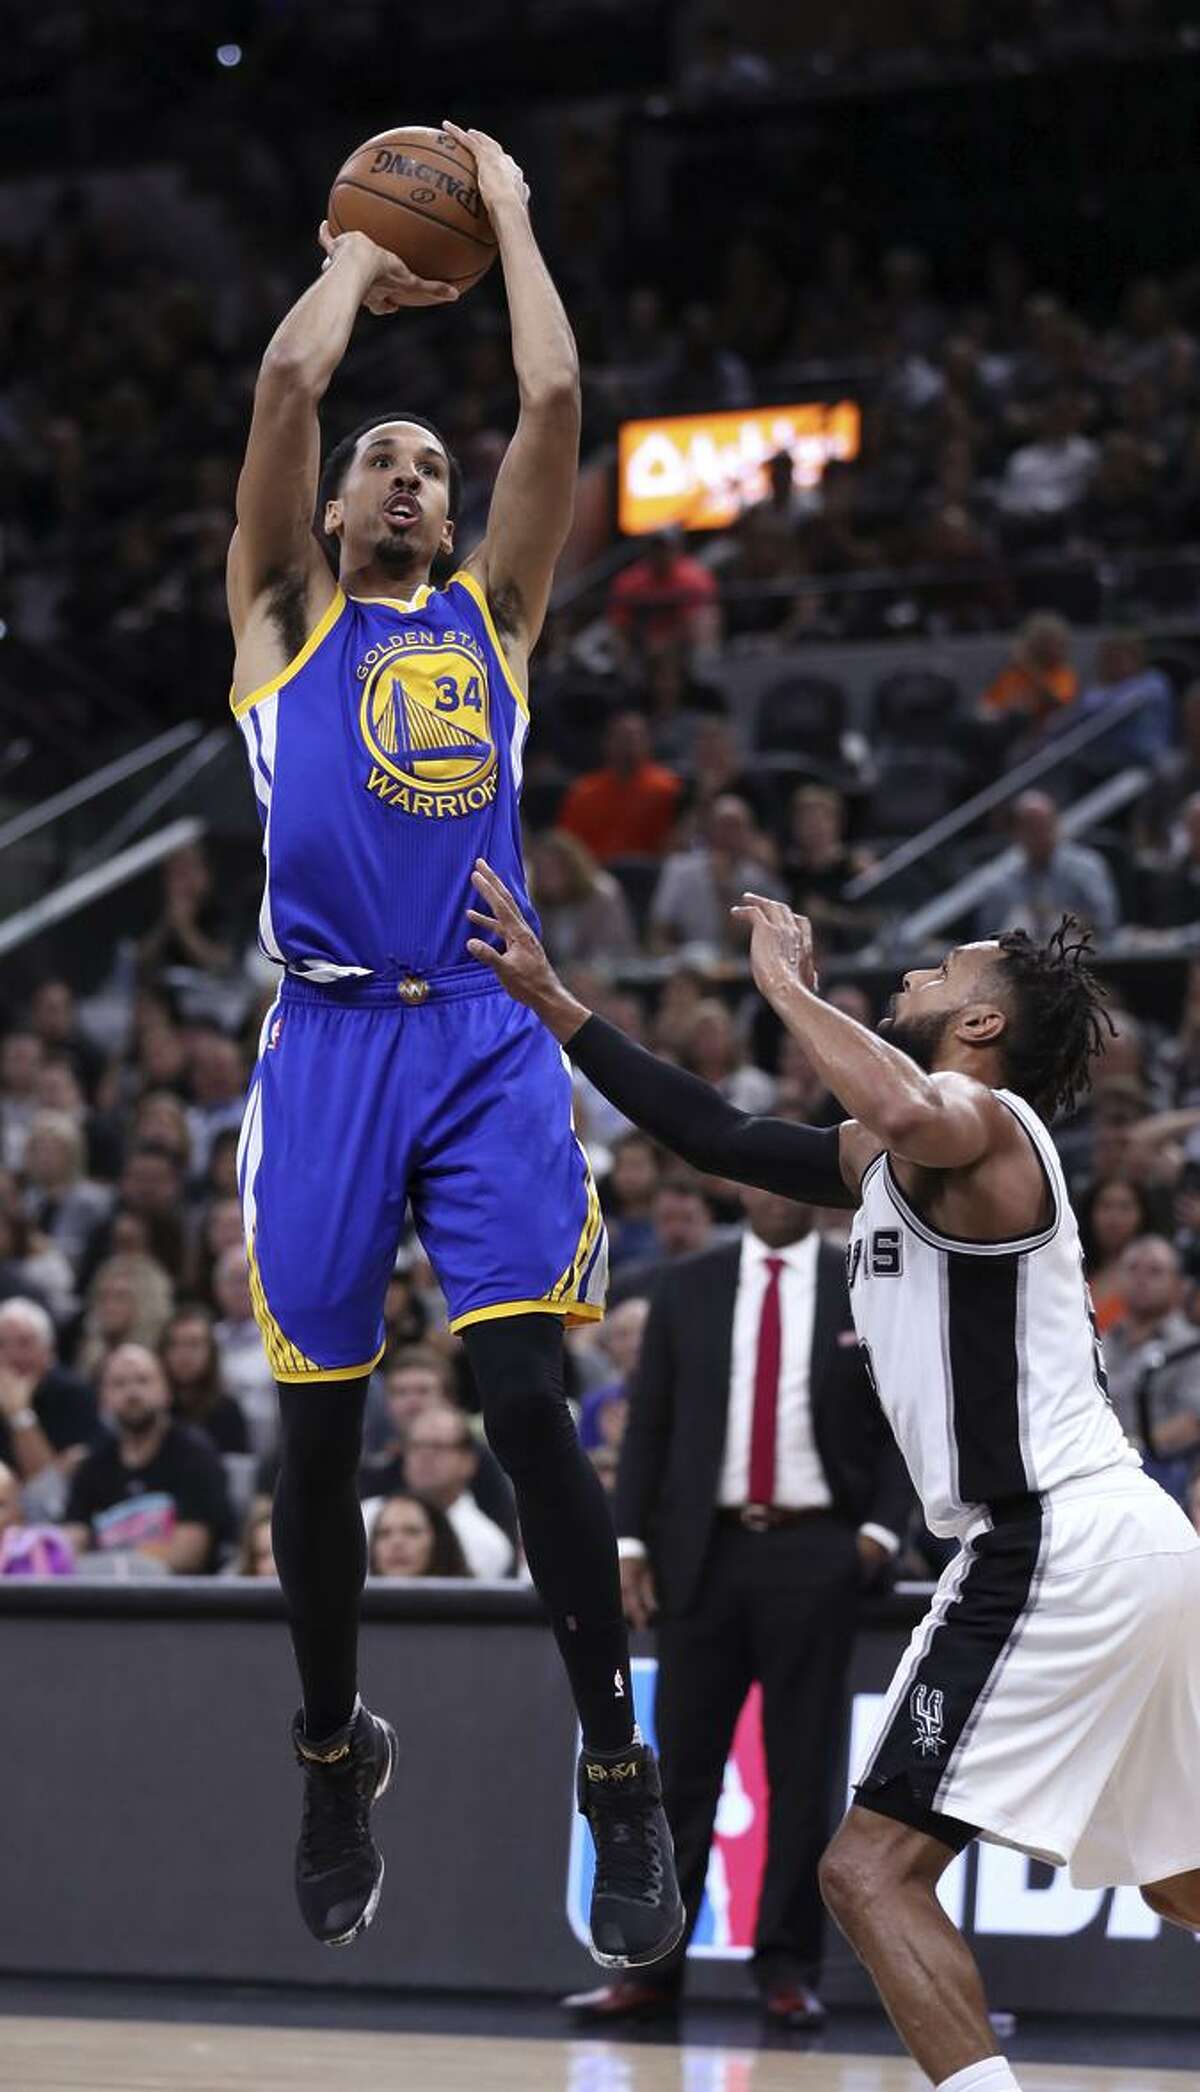 Golden State Warriors' Shaun Livingston against San Antonio Spurs during Game 4 of NBA Western Conference Finals at AT&T Center in San Antonio, Texas, on Monday, May 22, 2017.